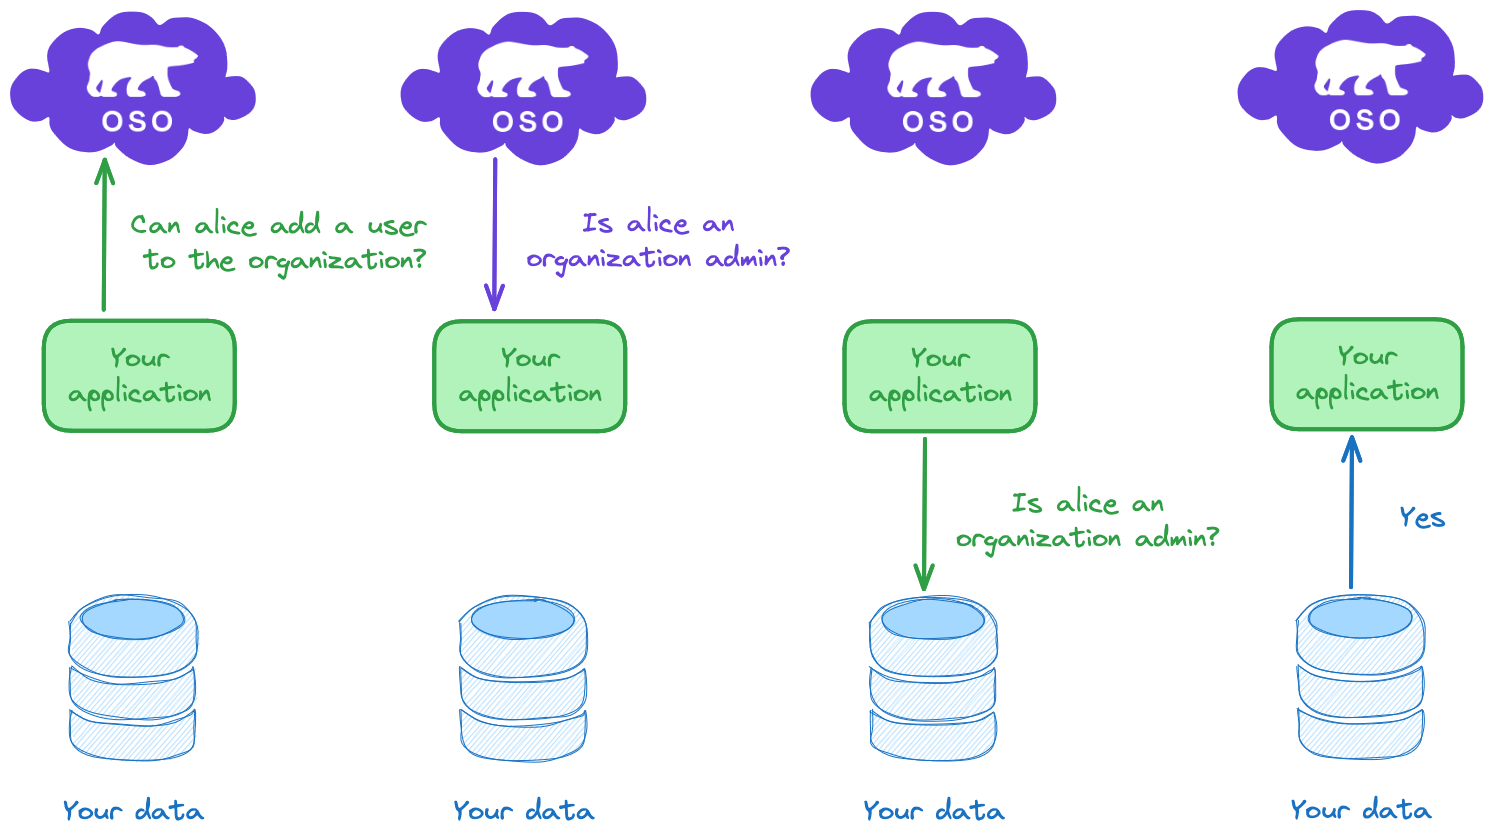 Authorization using data in your application databases